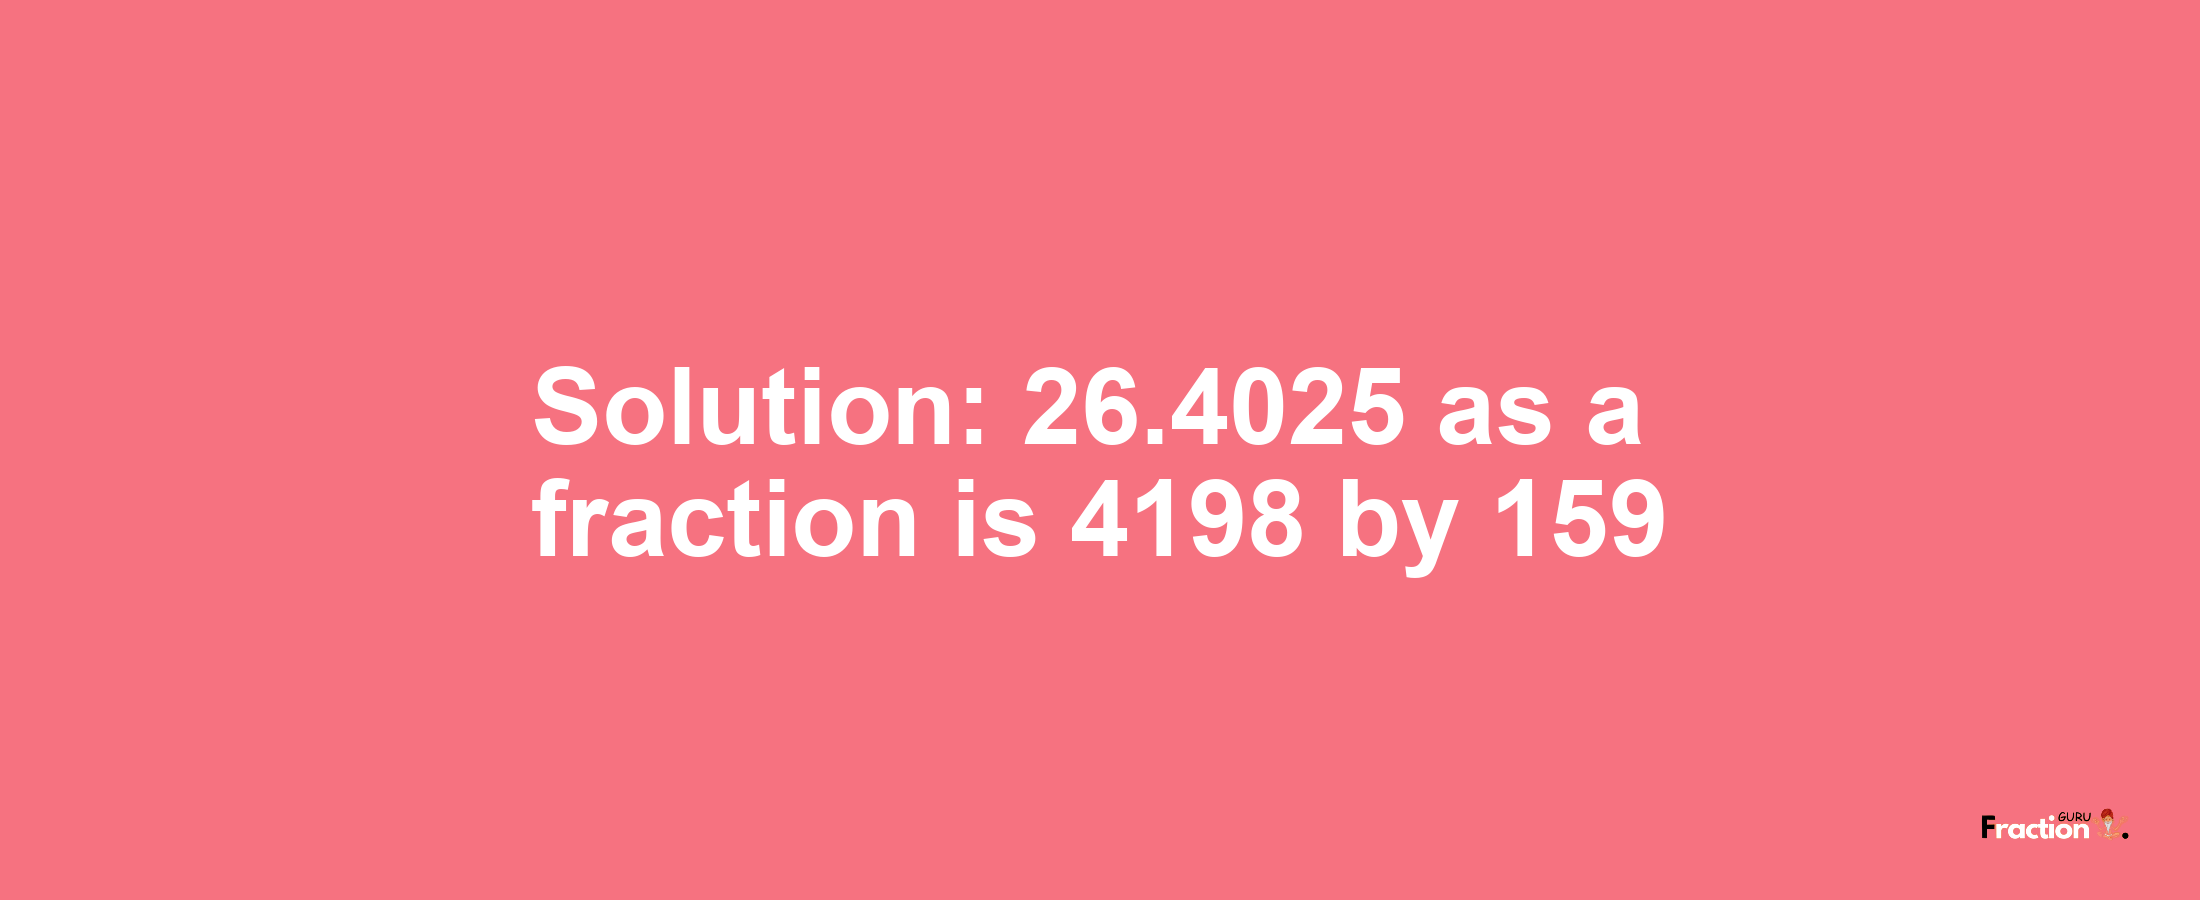 Solution:26.4025 as a fraction is 4198/159